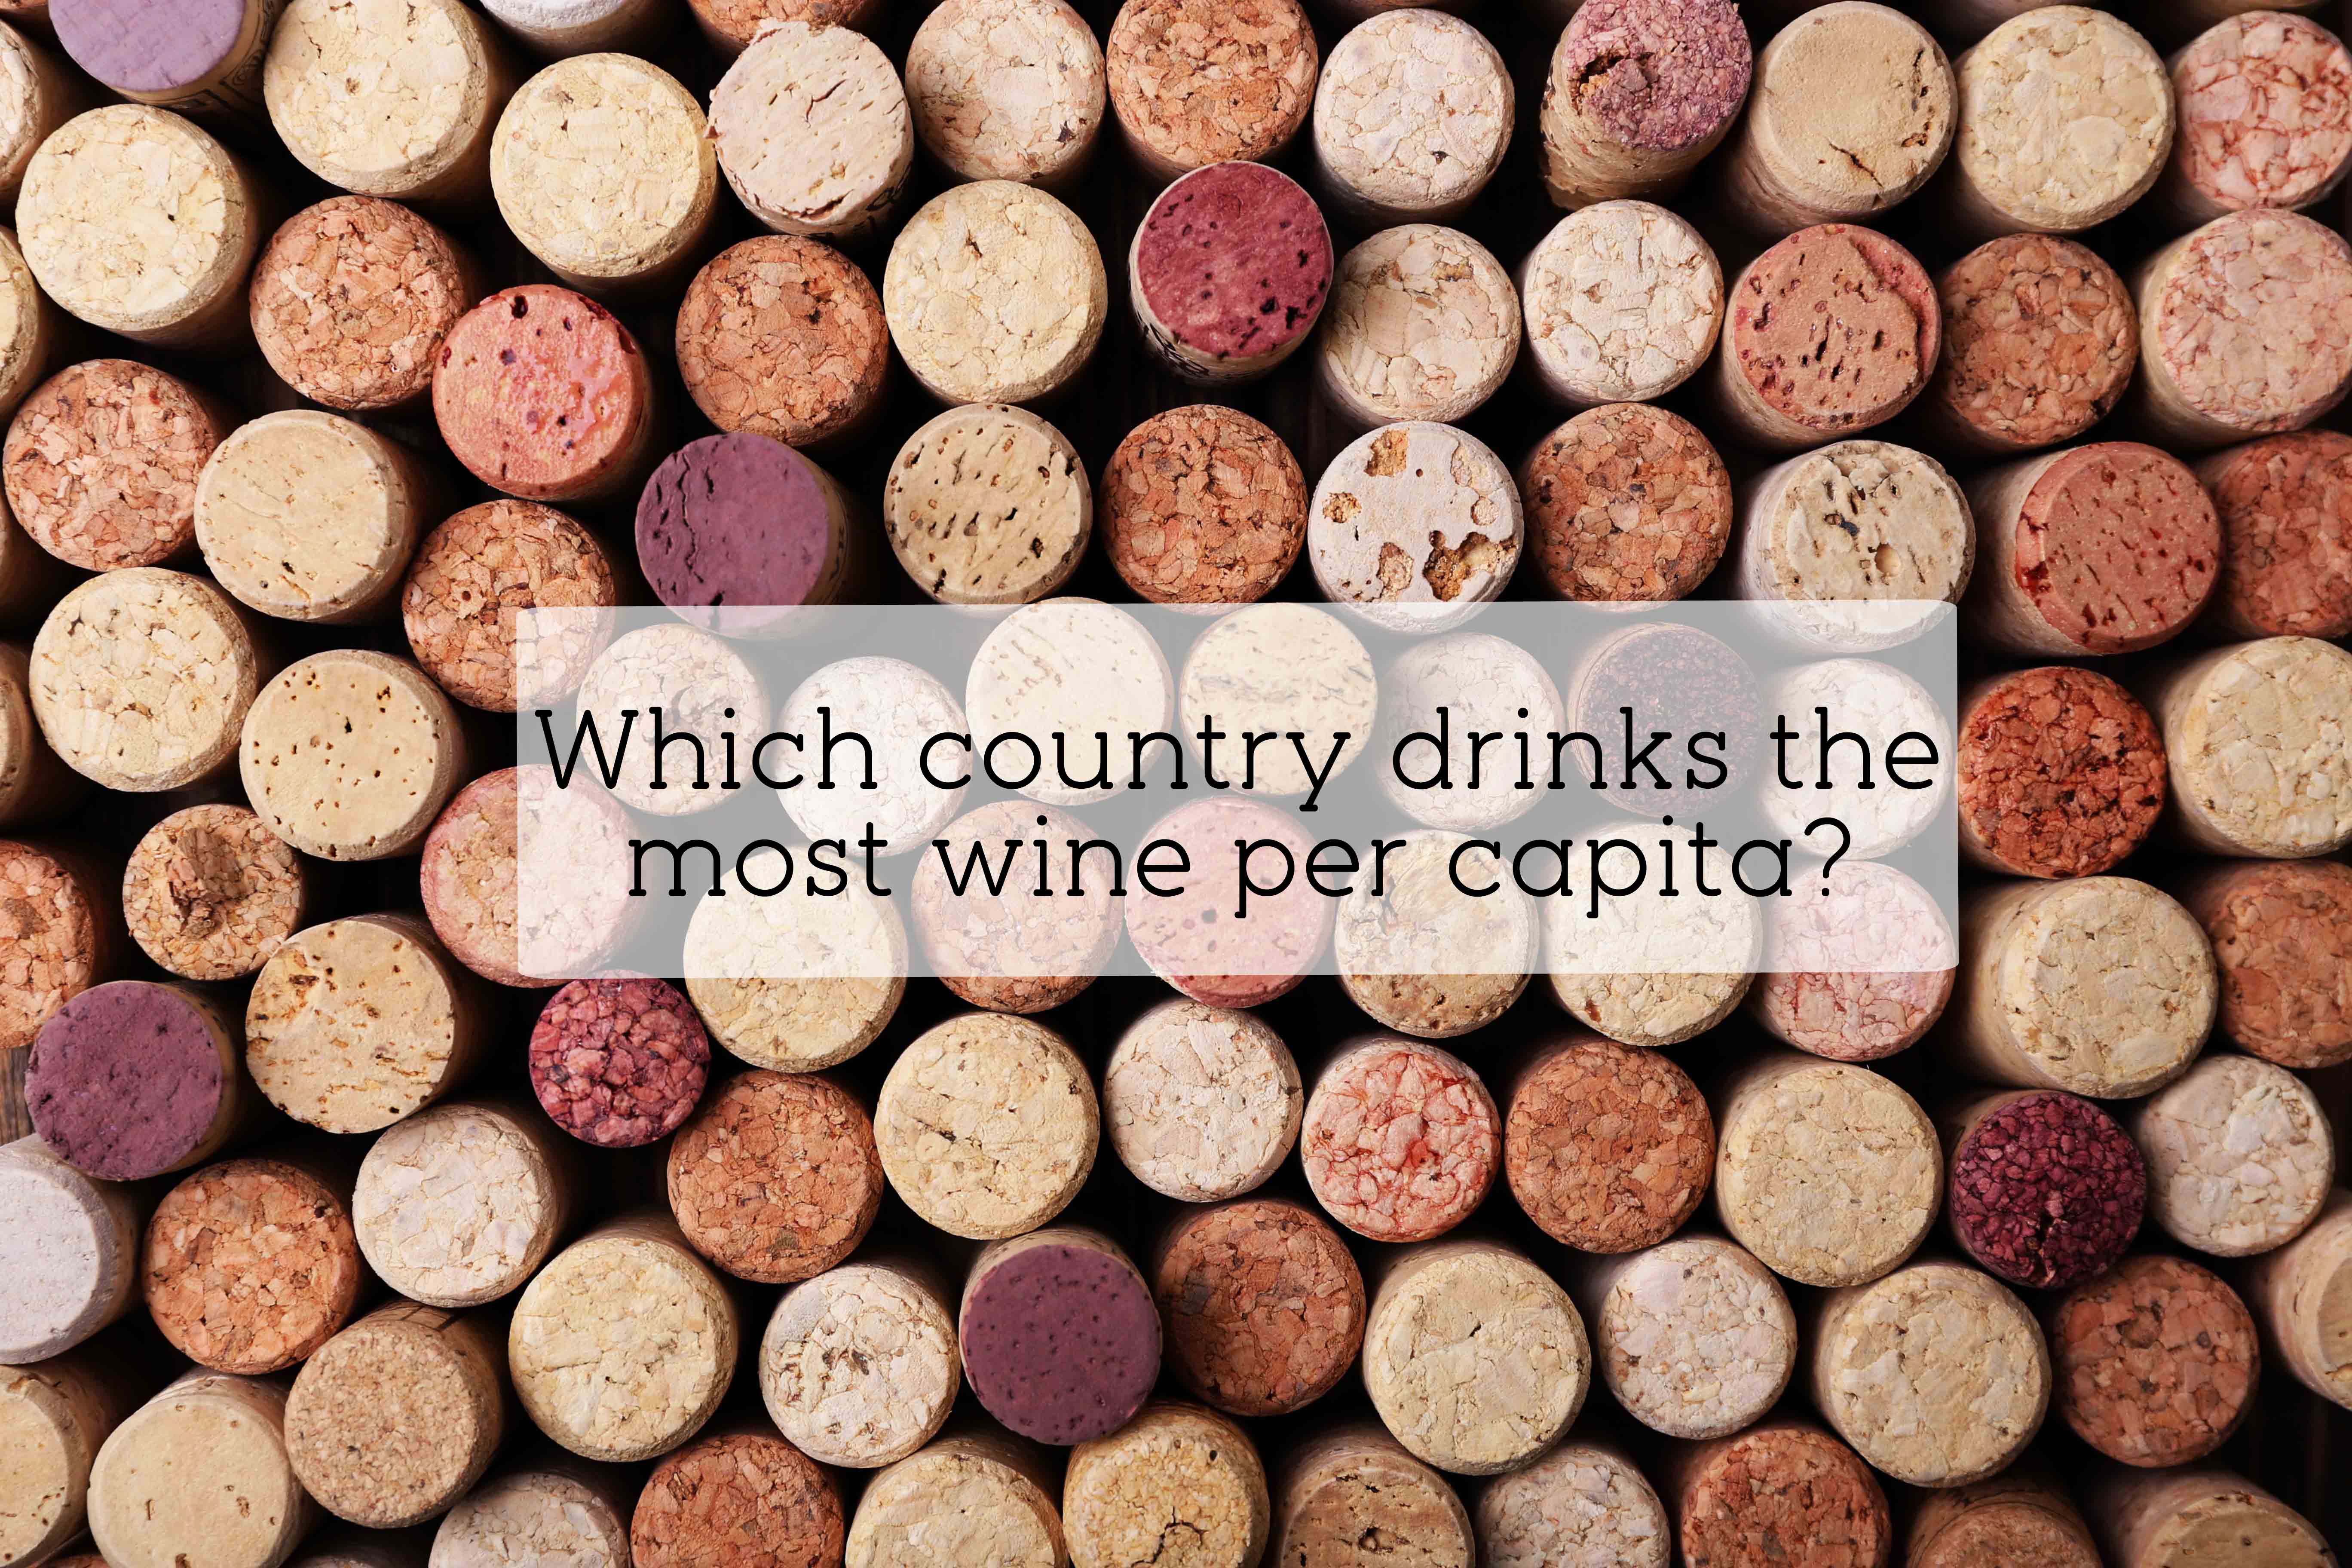 Which country drinks the most wine per capita?